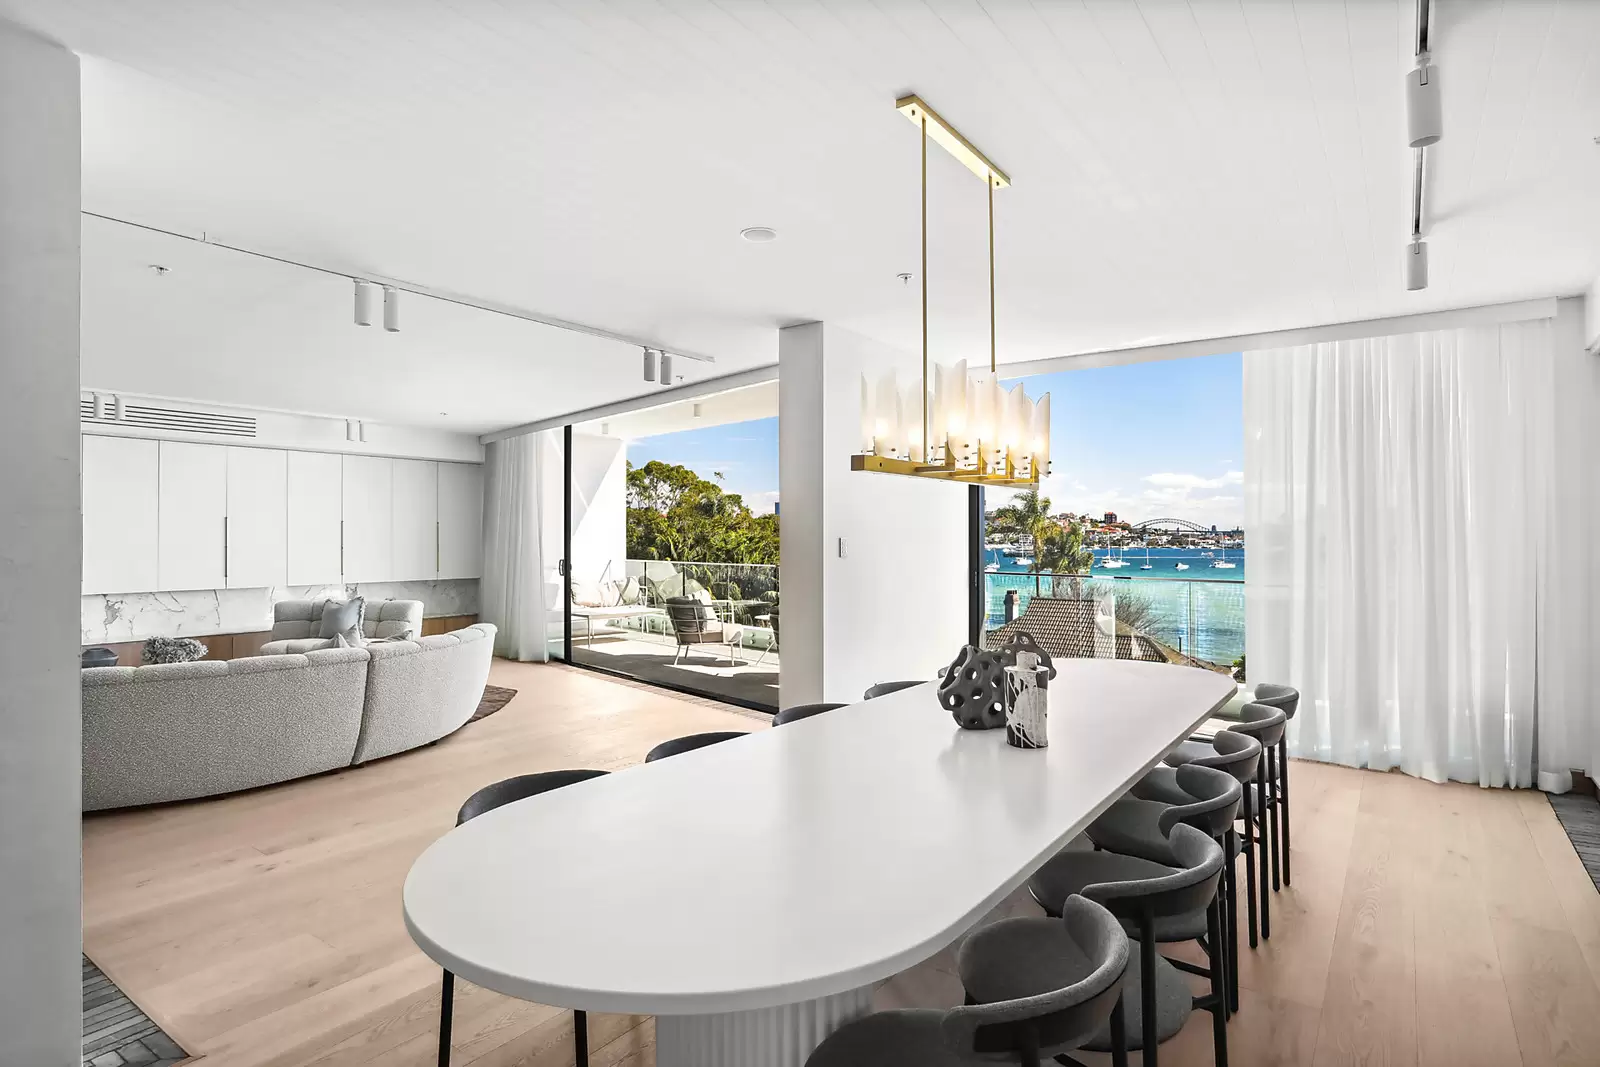 Photo #10: Penthouse /722 New South Head Road, Rose Bay - For Sale by Sydney Sotheby's International Realty